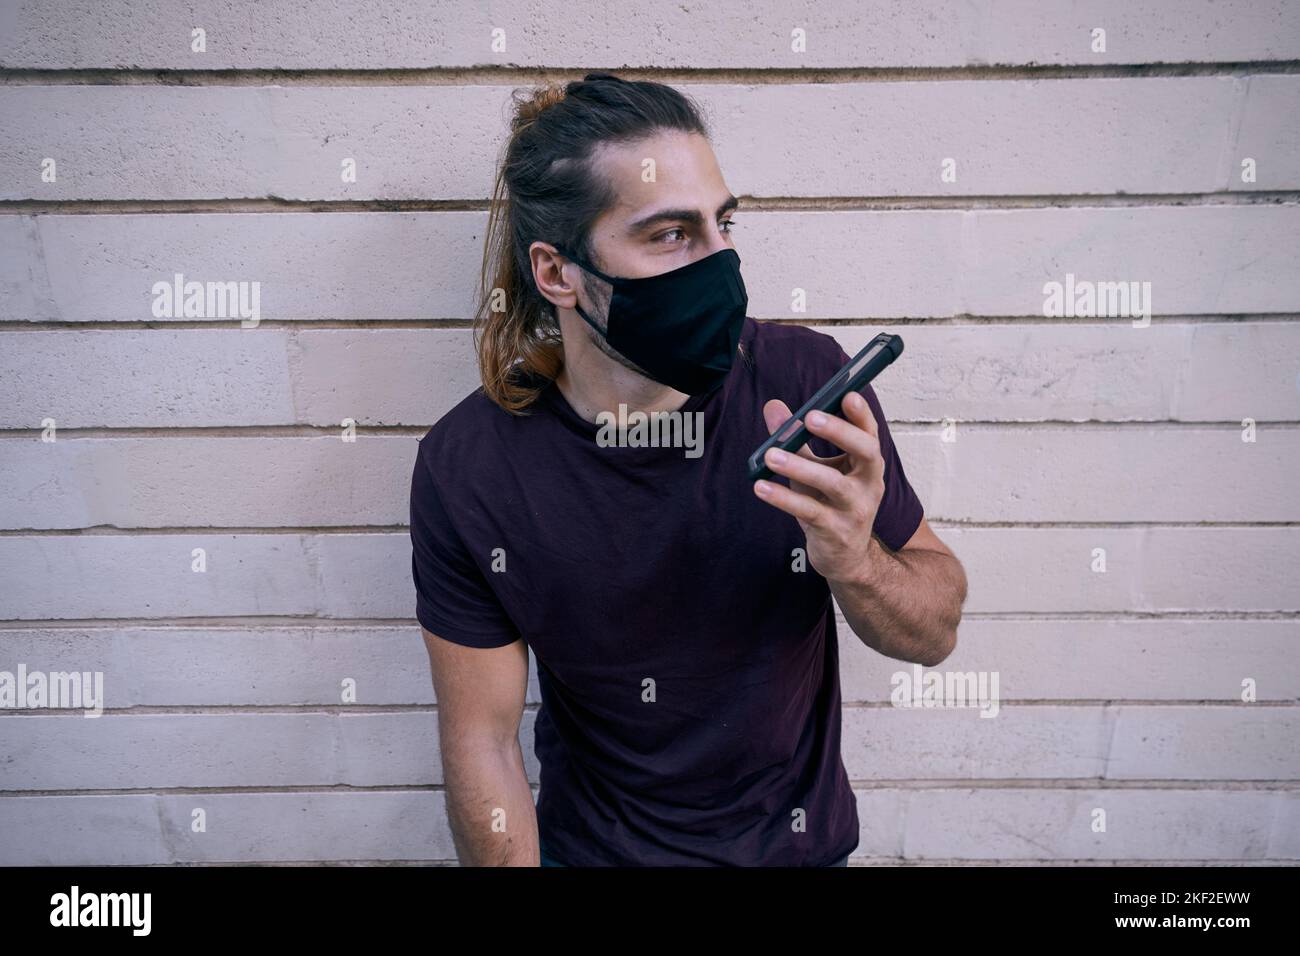 caucasian young man with long hair standing leaning against the wall talking on the smartphone wearing face mask Stock Photo